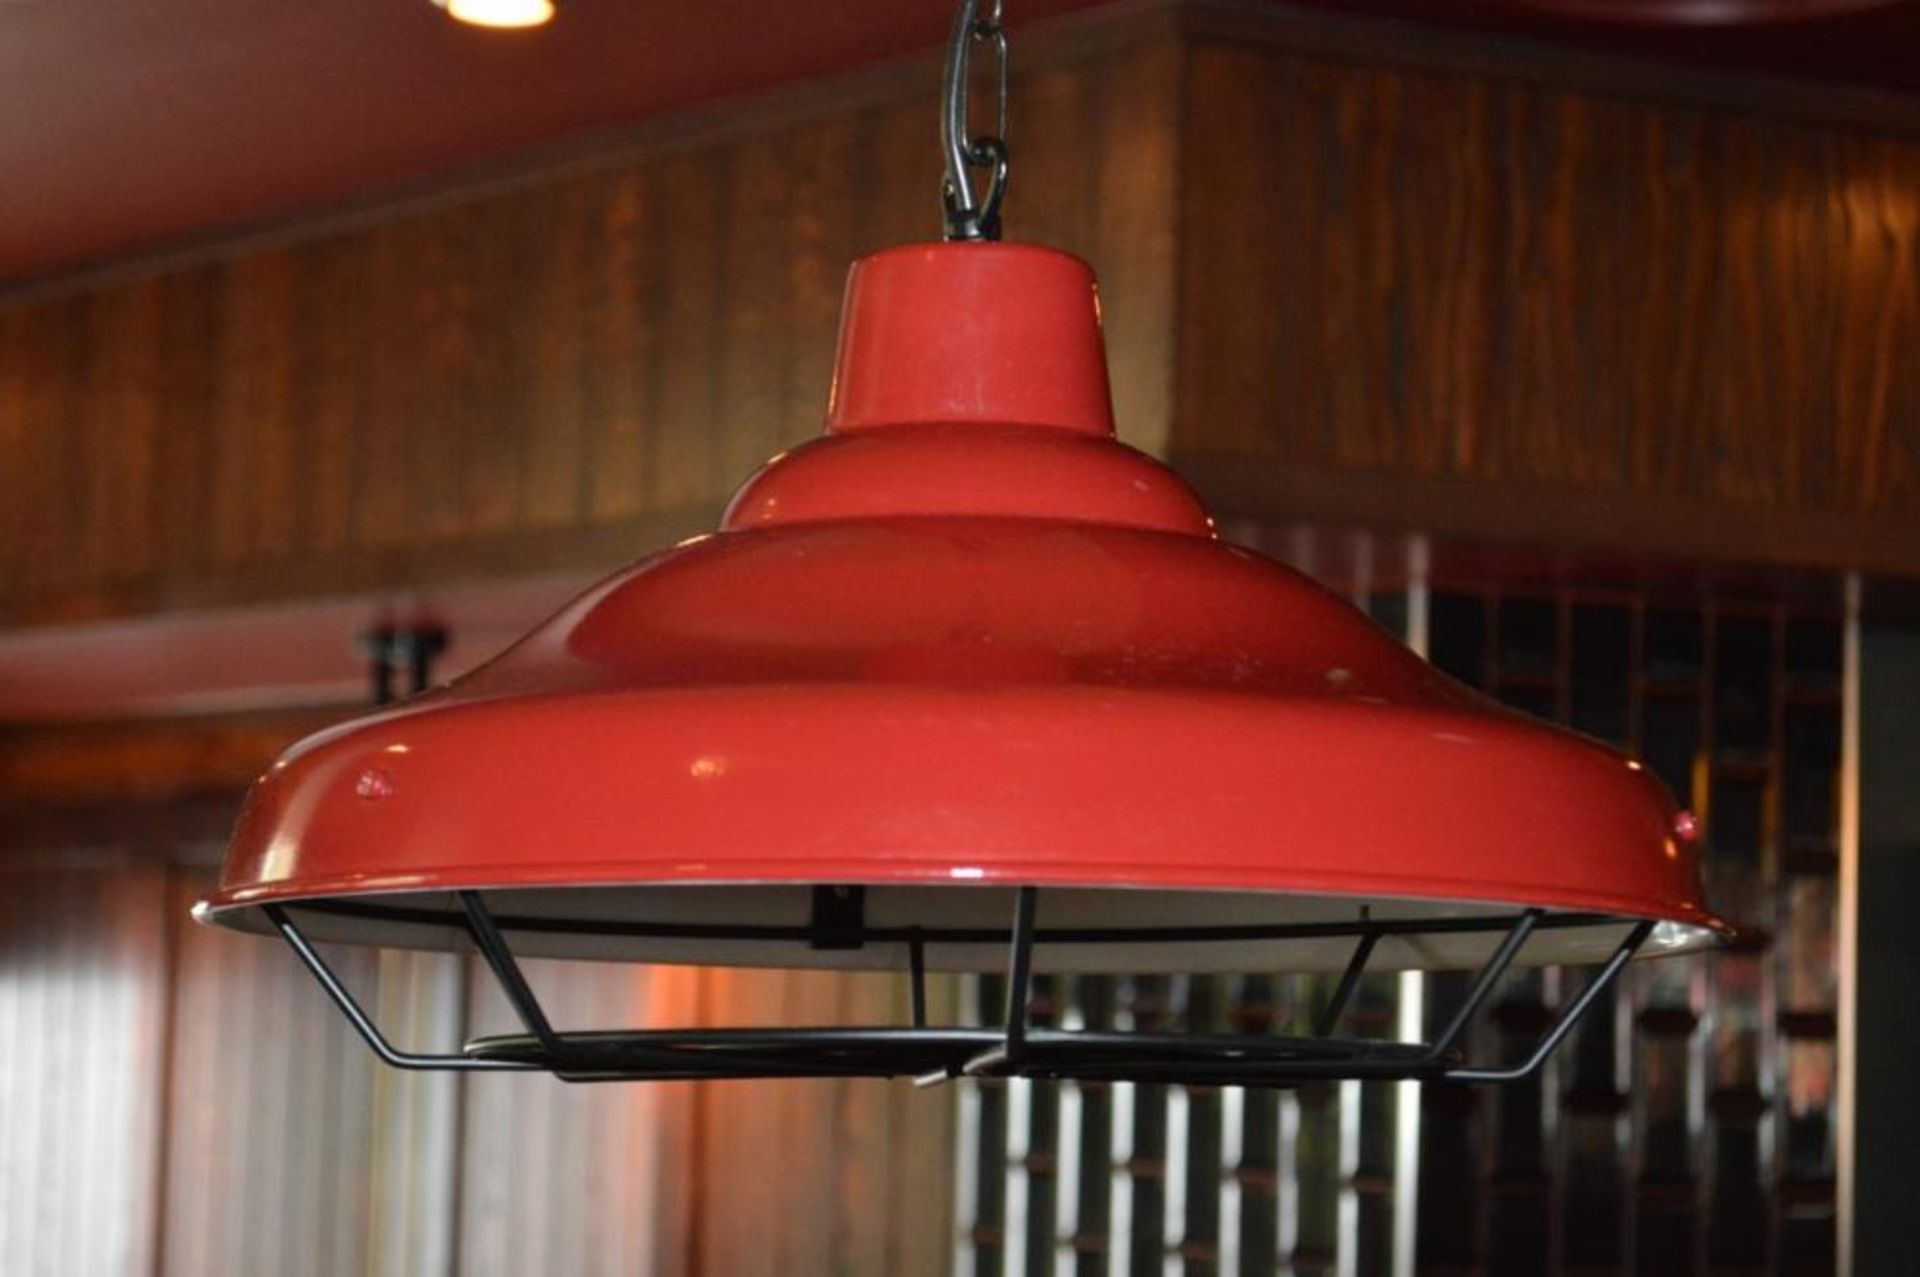 5 x Red Industrial Style Pendant Light Fittings With Black Chain and Cage - Manufactured by Northern - Image 3 of 7